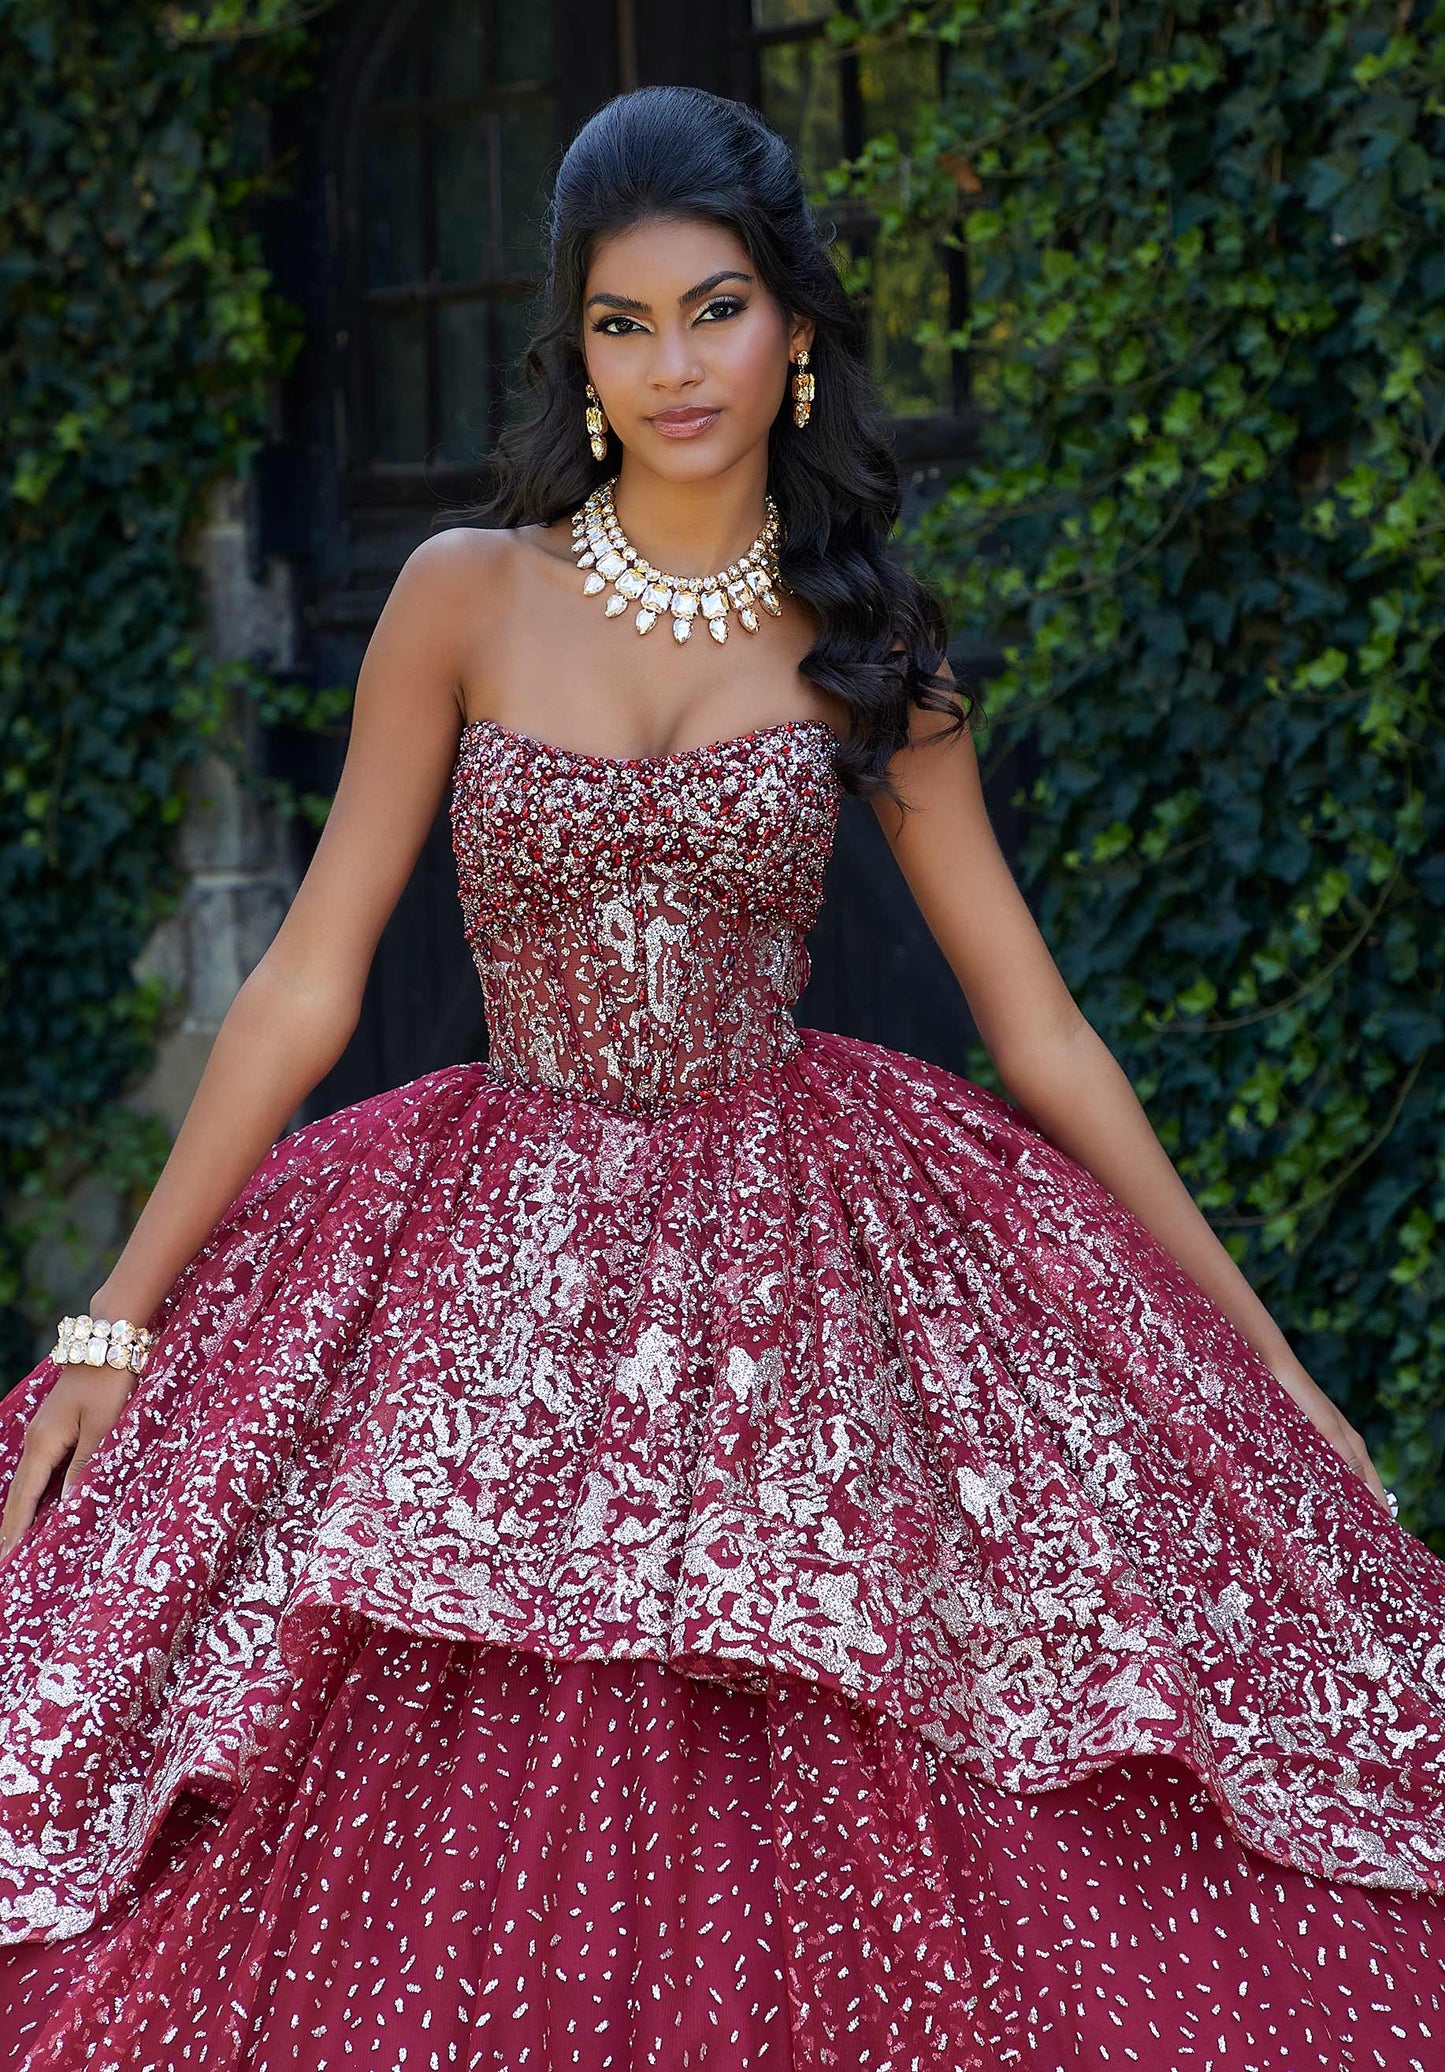 11873 | Crystal Beading on a Patterned Glitter Tulle Ball Gown with Edged Skirt Overlay Quinceanera Dress